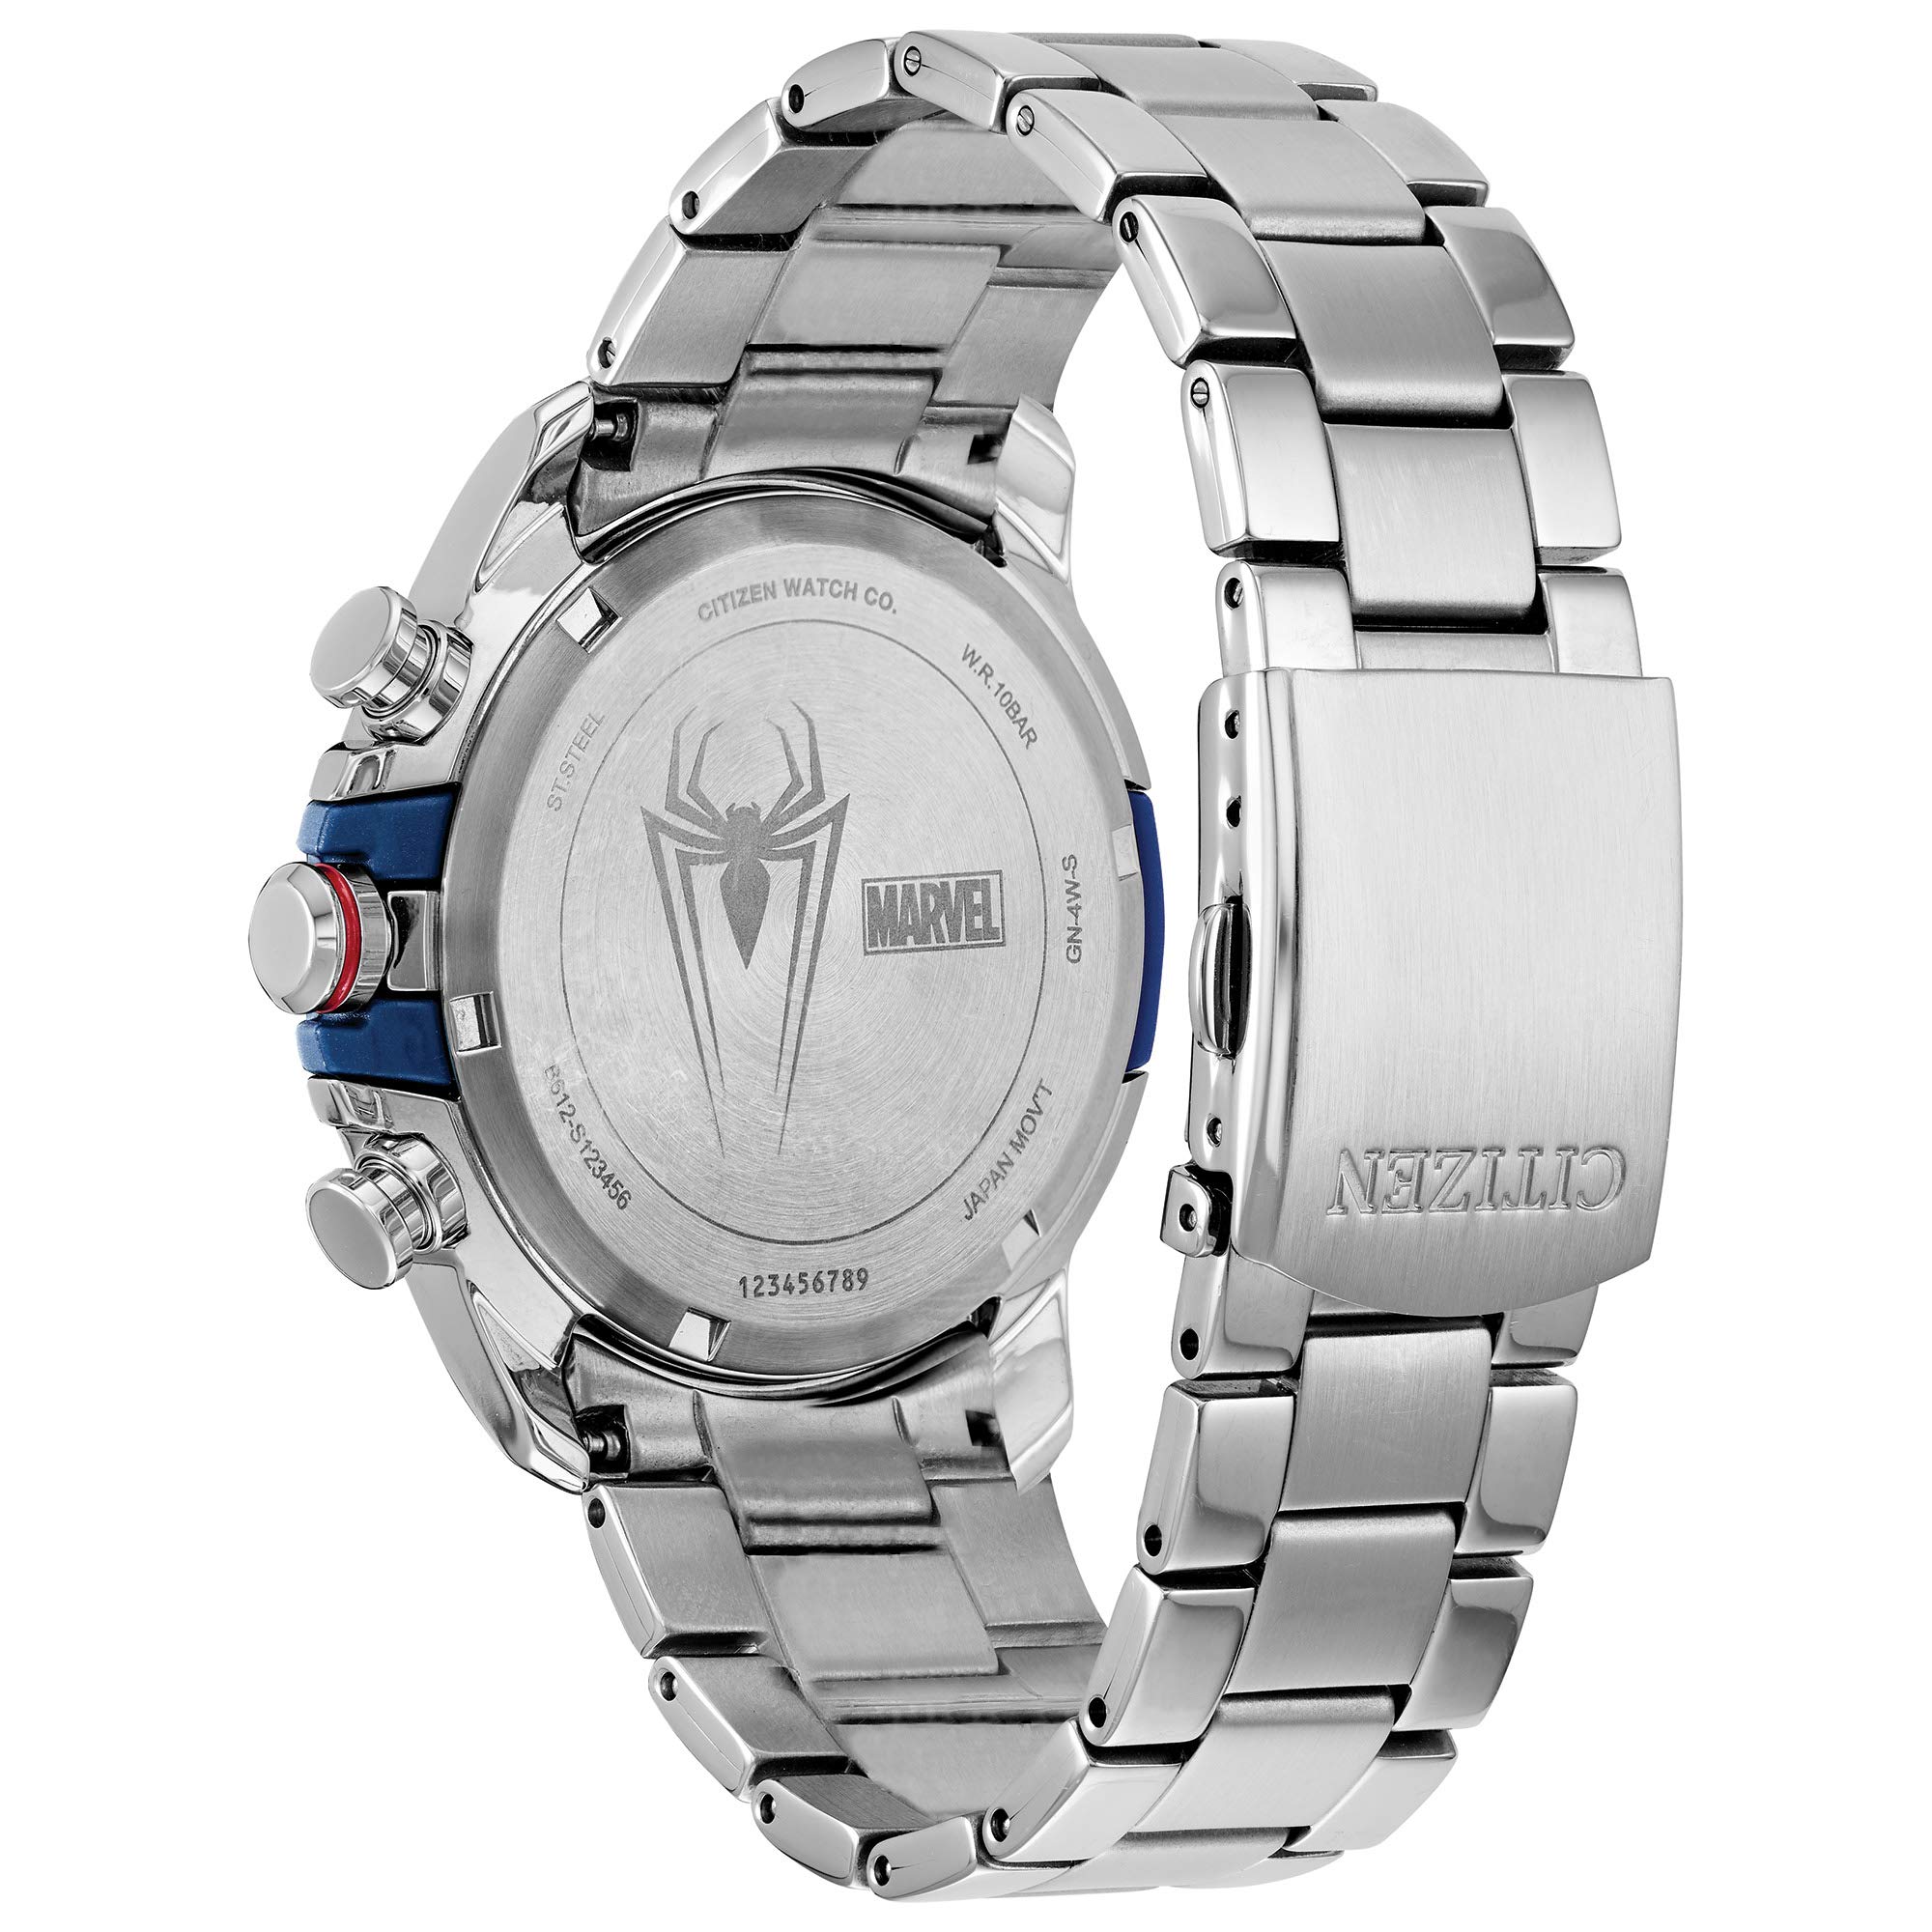 Citizen Men's Eco-Drive Marvel Spider Man Watch in Stainless Steel, Spider Man Art Blue and Red Dial (Model: CA0429-53W)